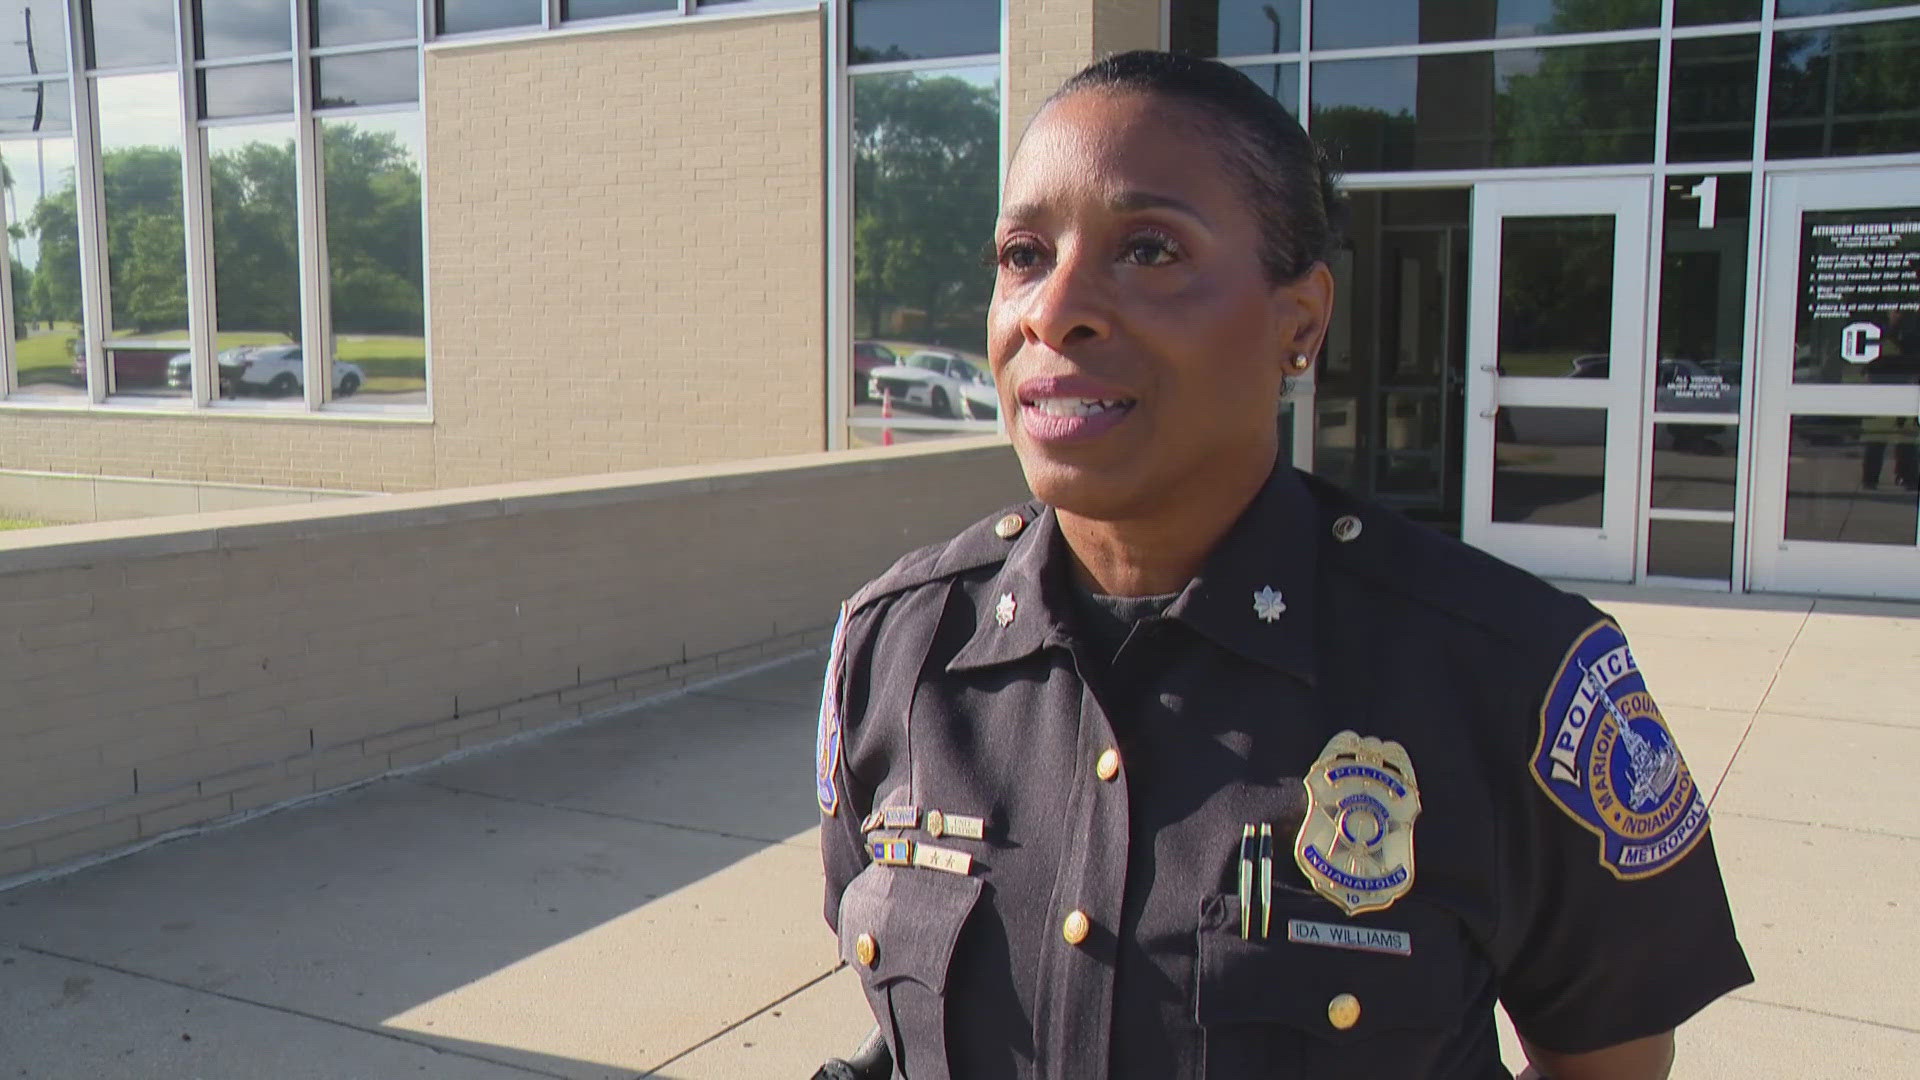 13News reporter Emily Longnecker sits down with retiring IMPD commander Ida Williams on why she's decided to join IPS.